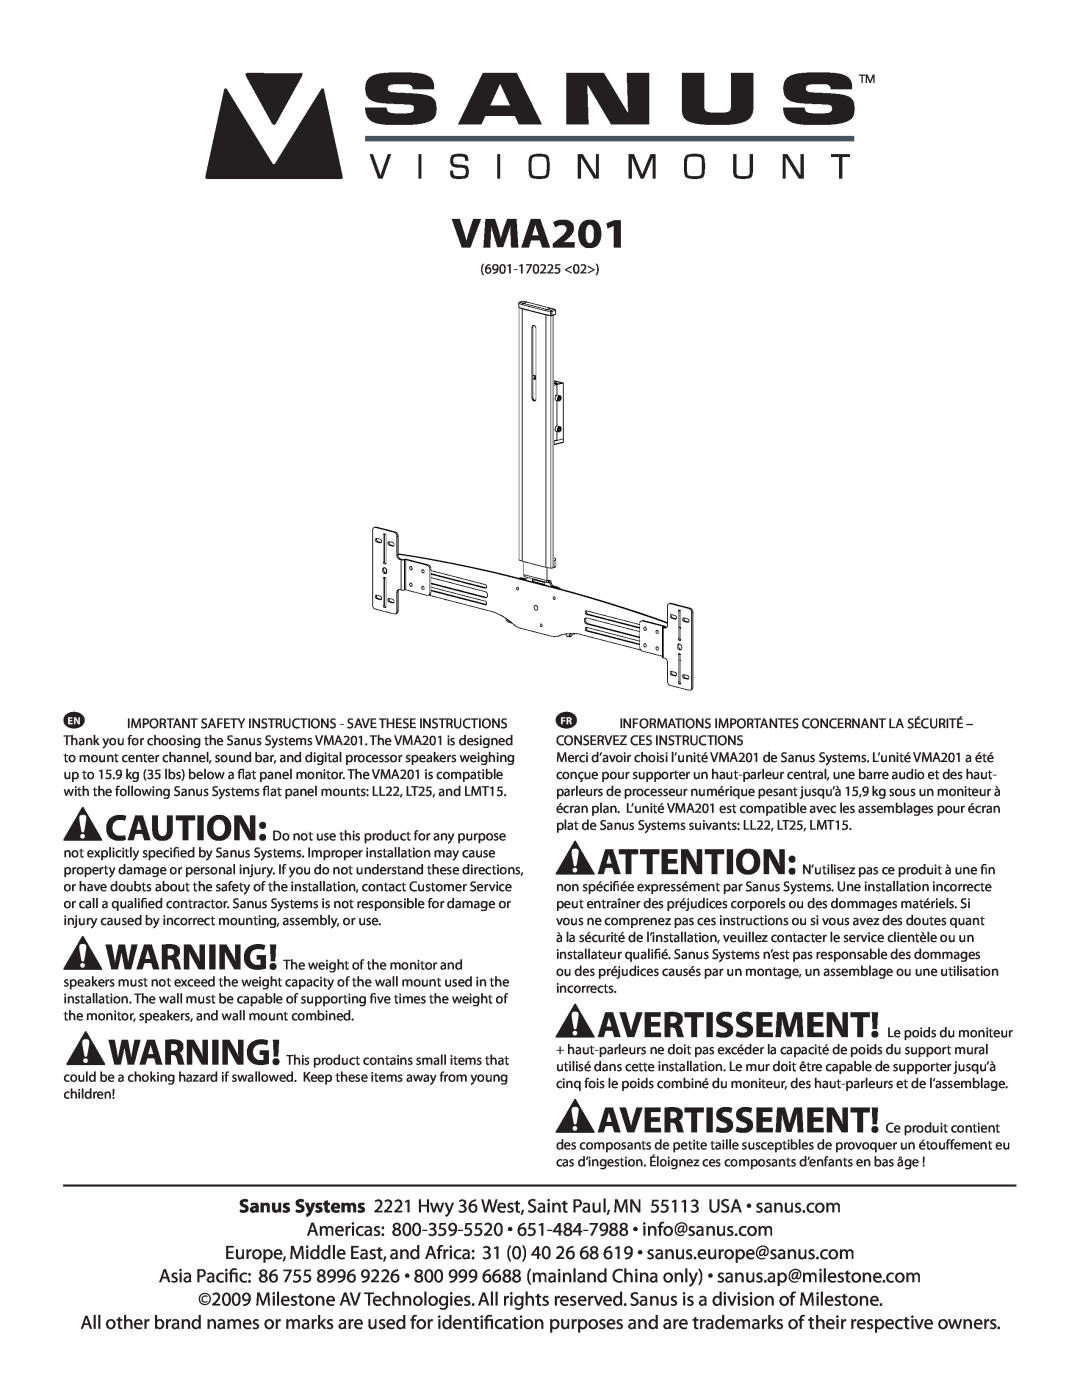 Sanus Systems VMA201 important safety instructions 